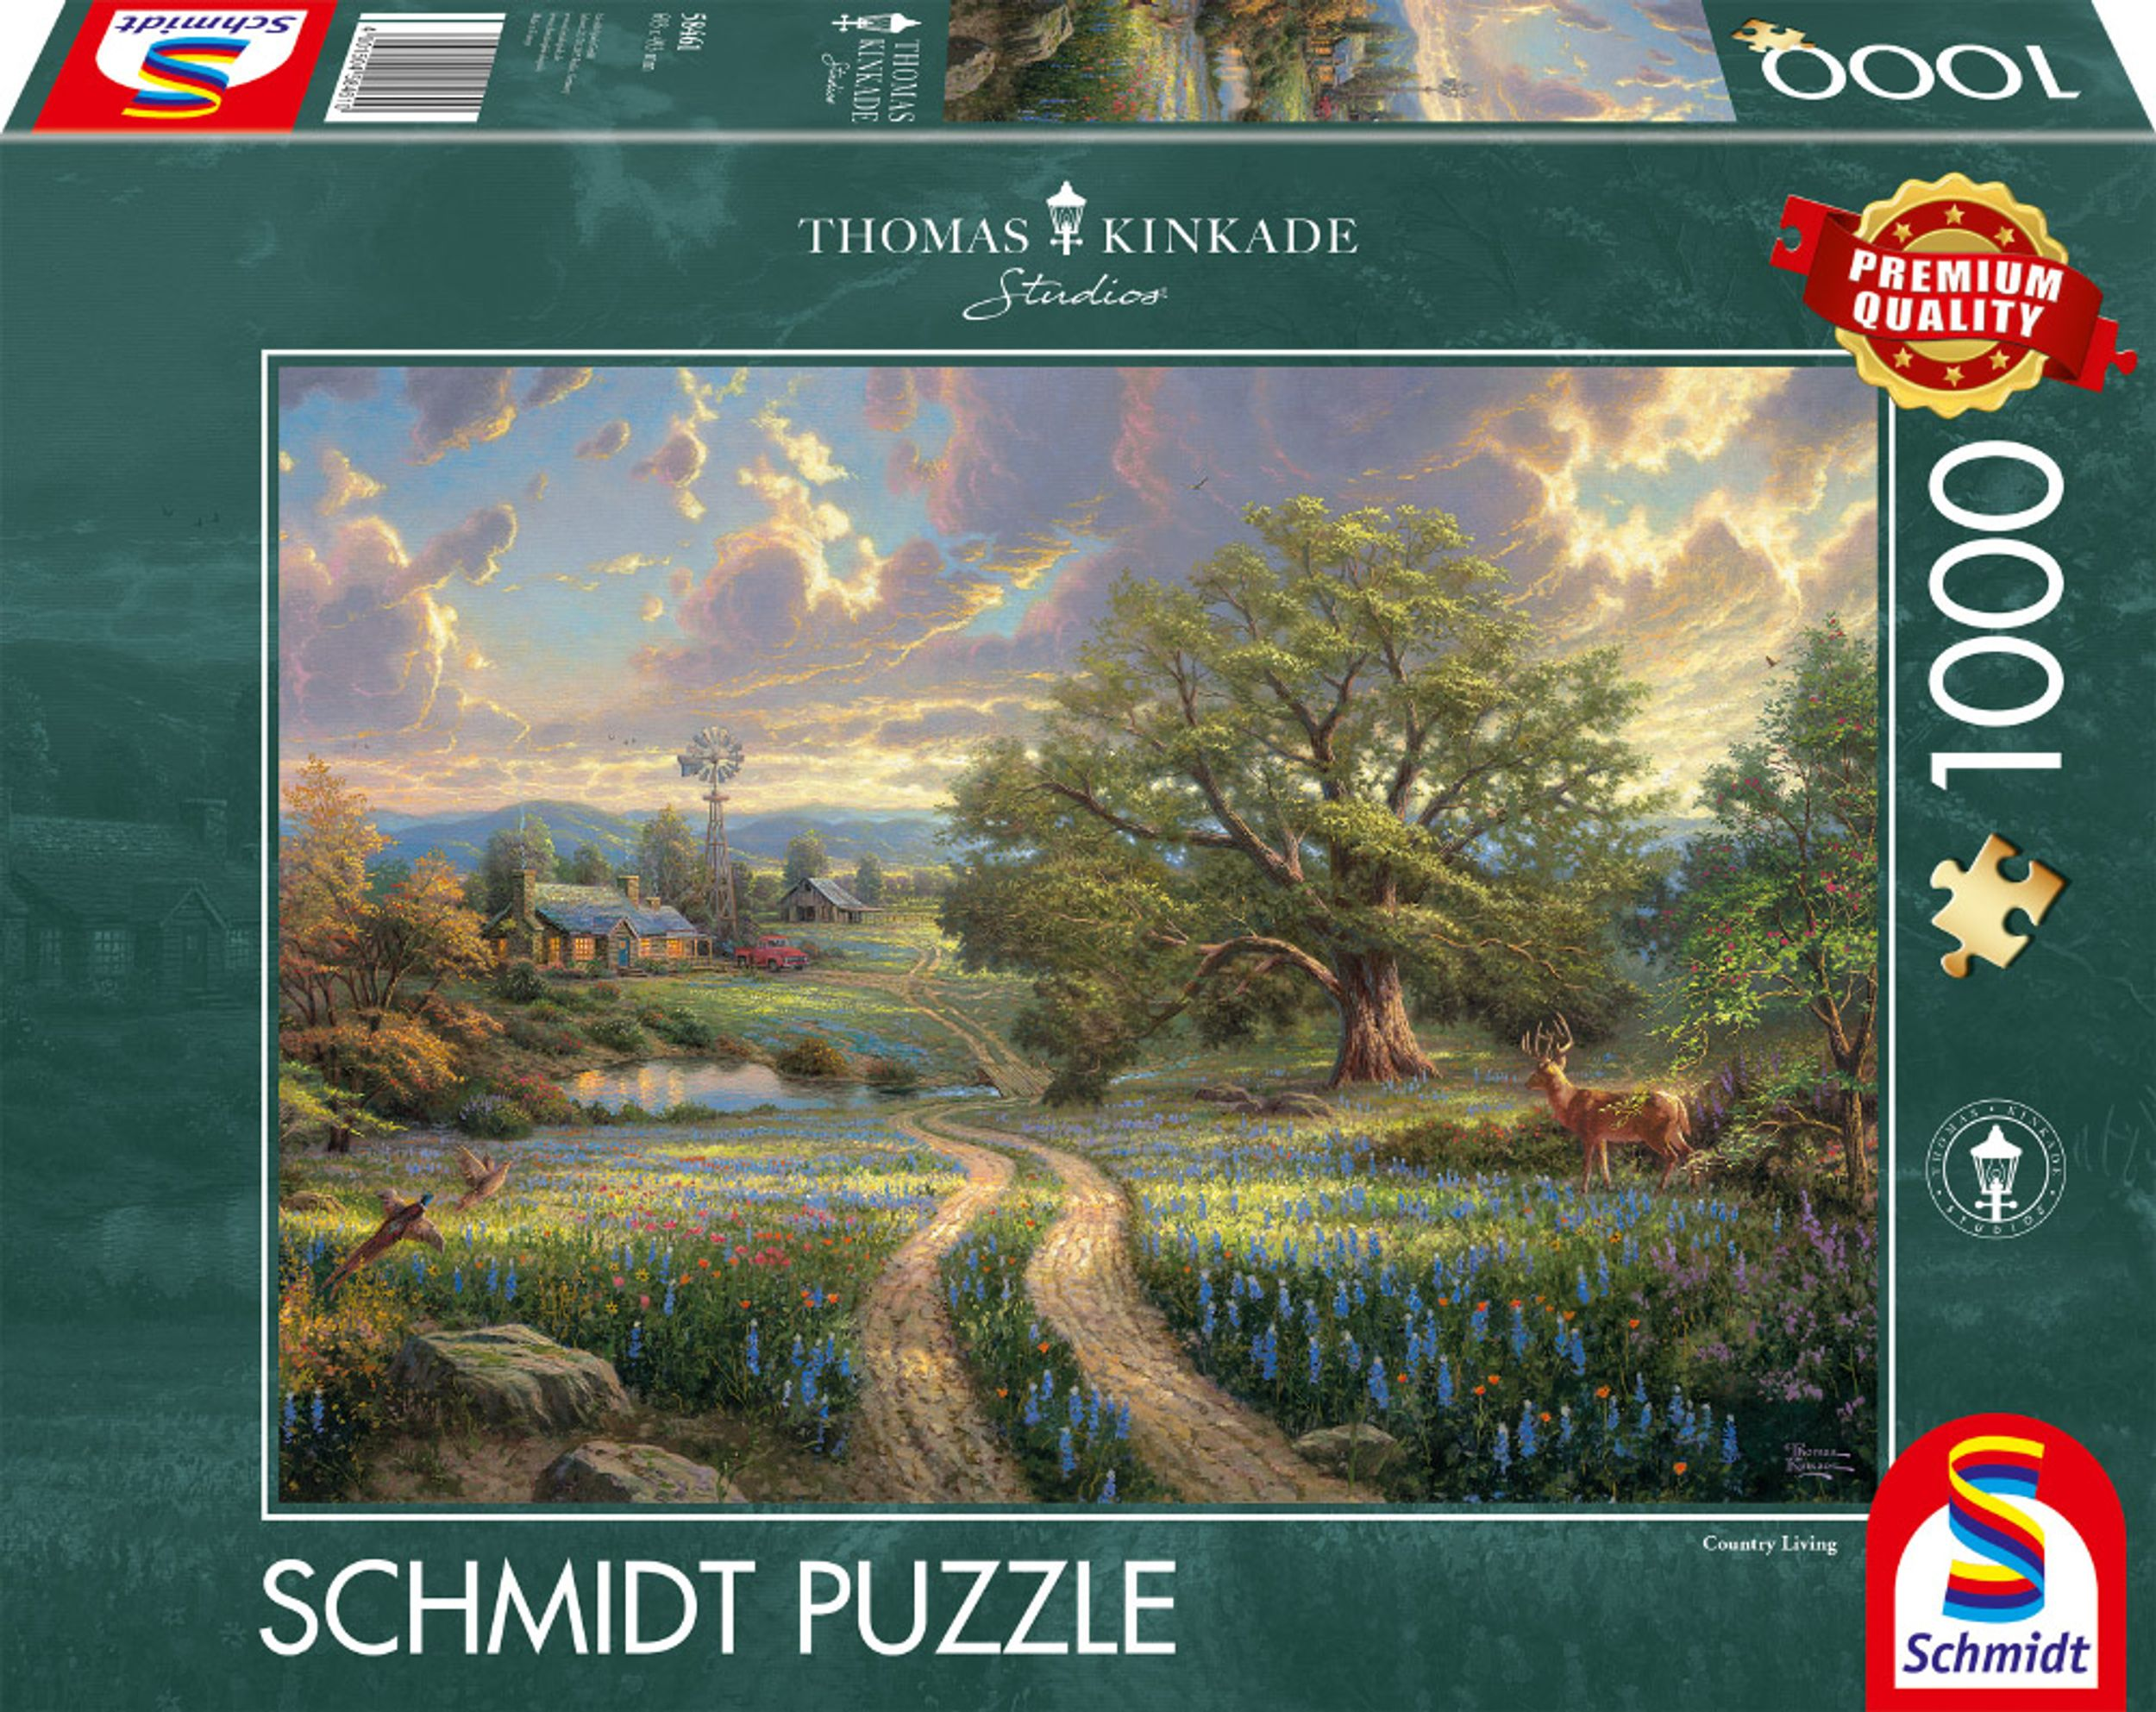 Living Country Puzzle SPIELE SCHMIDT